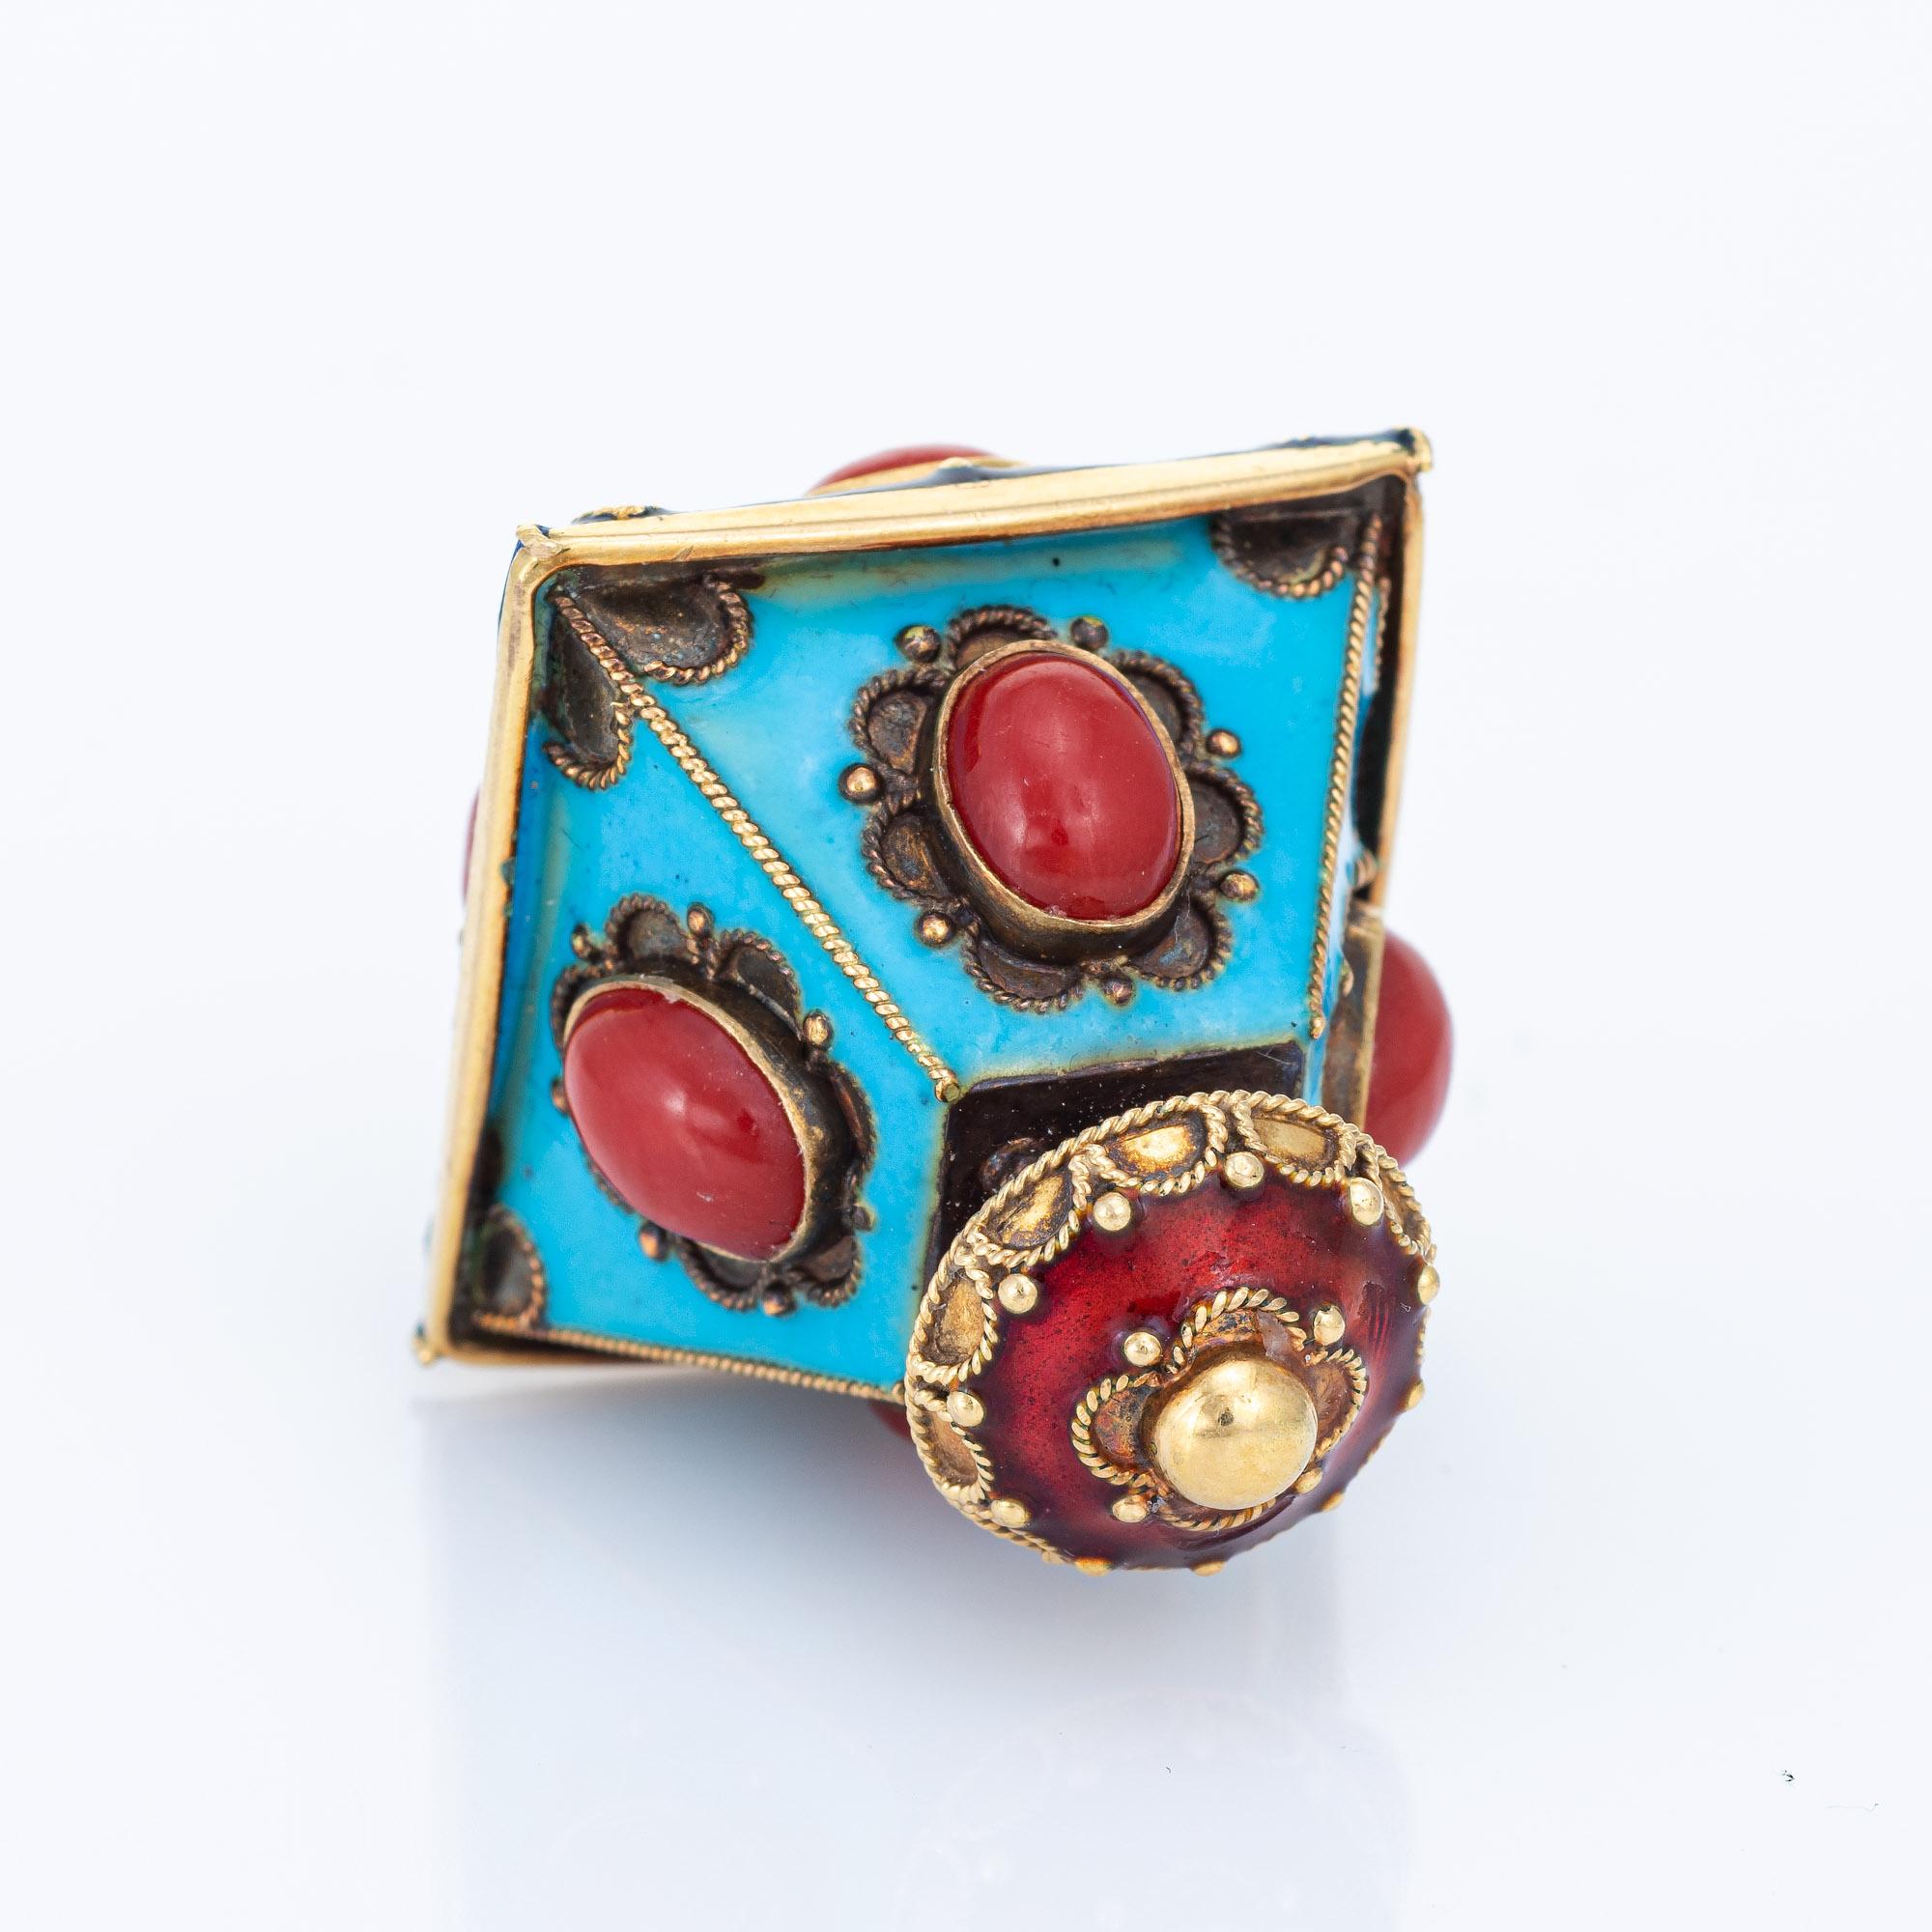 Finely detailed vintage lantern charm crafted in 18 karat yellow gold (circa 1960s). 

Eight pieces of cabochon cut Mediterranean red coral measures from 7mm x 3.5mm and 8mm x 5.5mm. The coral is in very good condition and free of cracks or